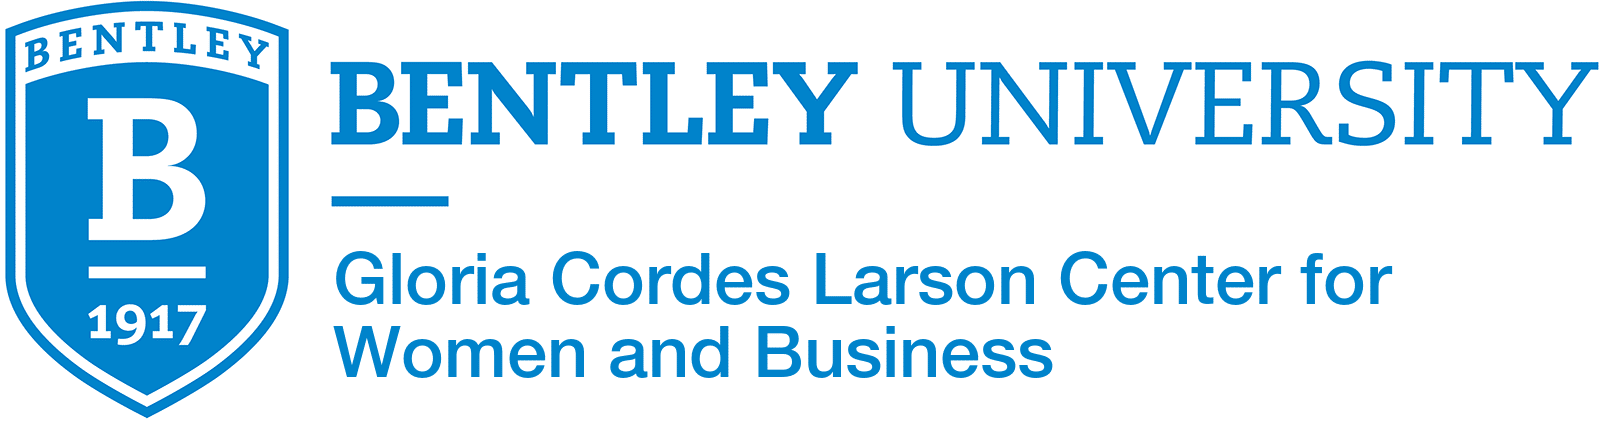 The Gloria Cordes Larson Center for Women and Business at Bentley University logo.